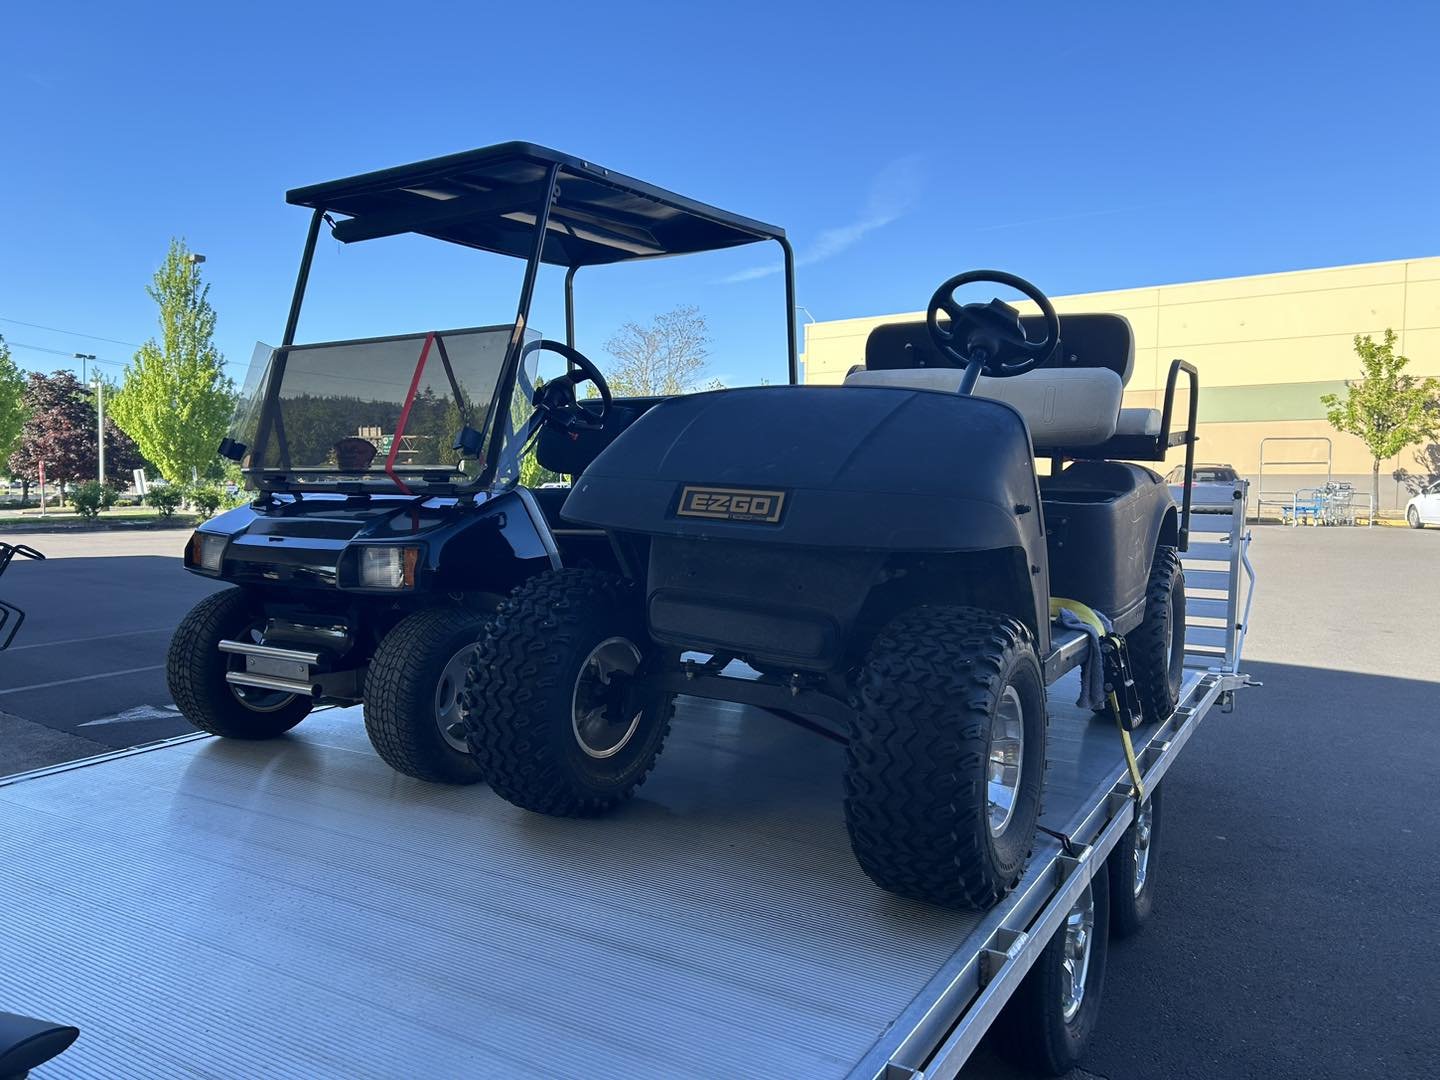 A couple of unique custom classic carts on the trailer today! Whether you have a clean neighborhood cruiser or navigate your property in a lifted rig we can handle your maintenance needs! Call us today - 503-505-6446

#Portland #Hillsboro #SmallBusin